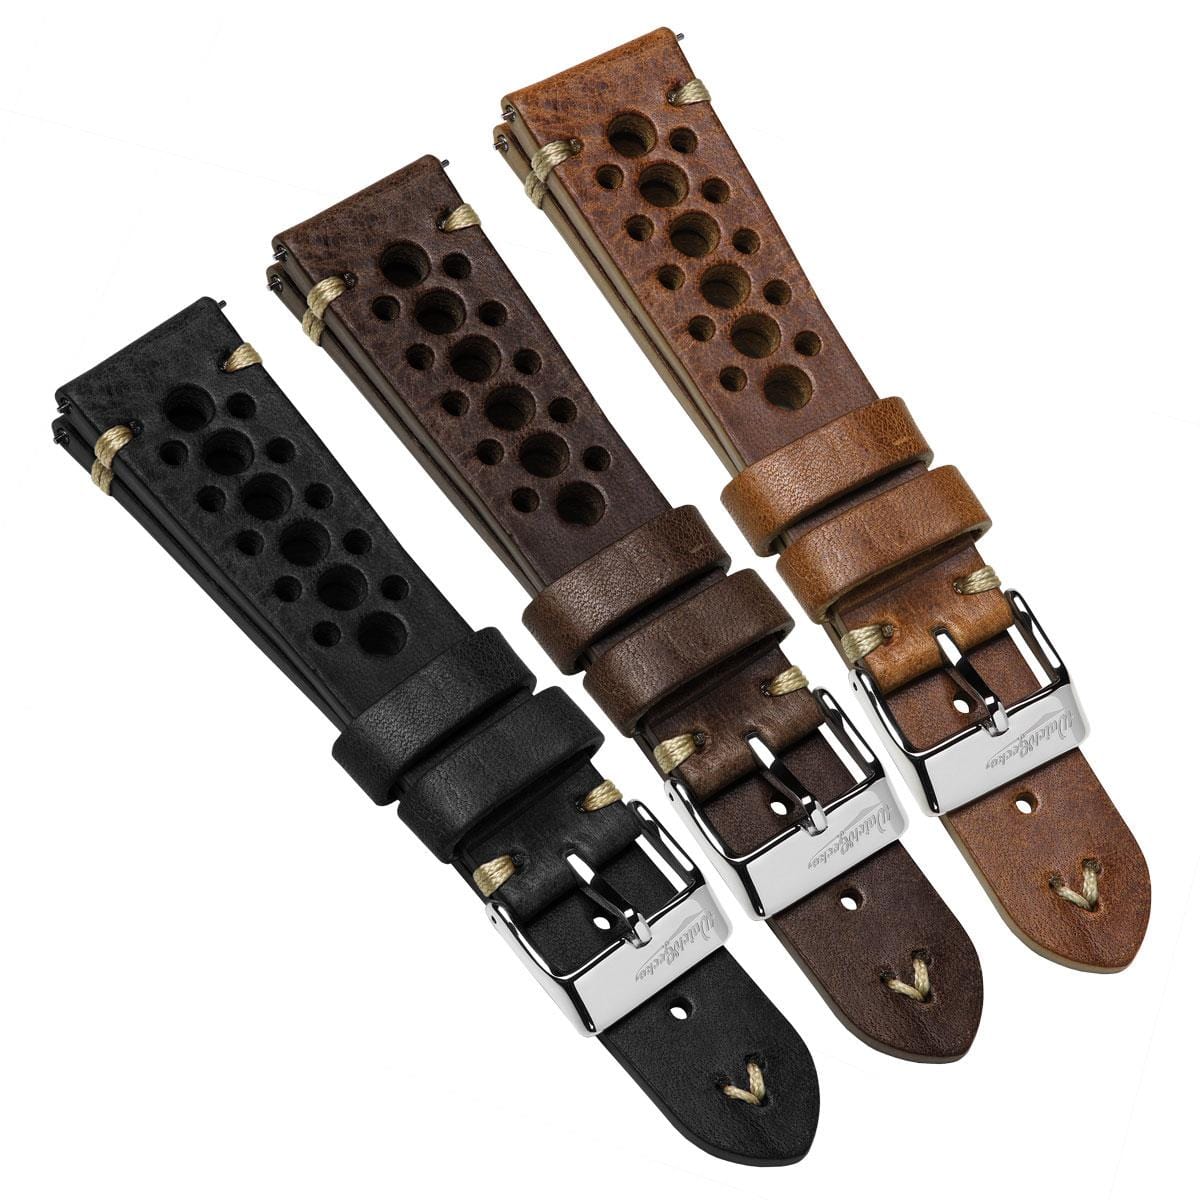 Simple Handmade Italian Leather Perforated Watch Strap - Light Brown